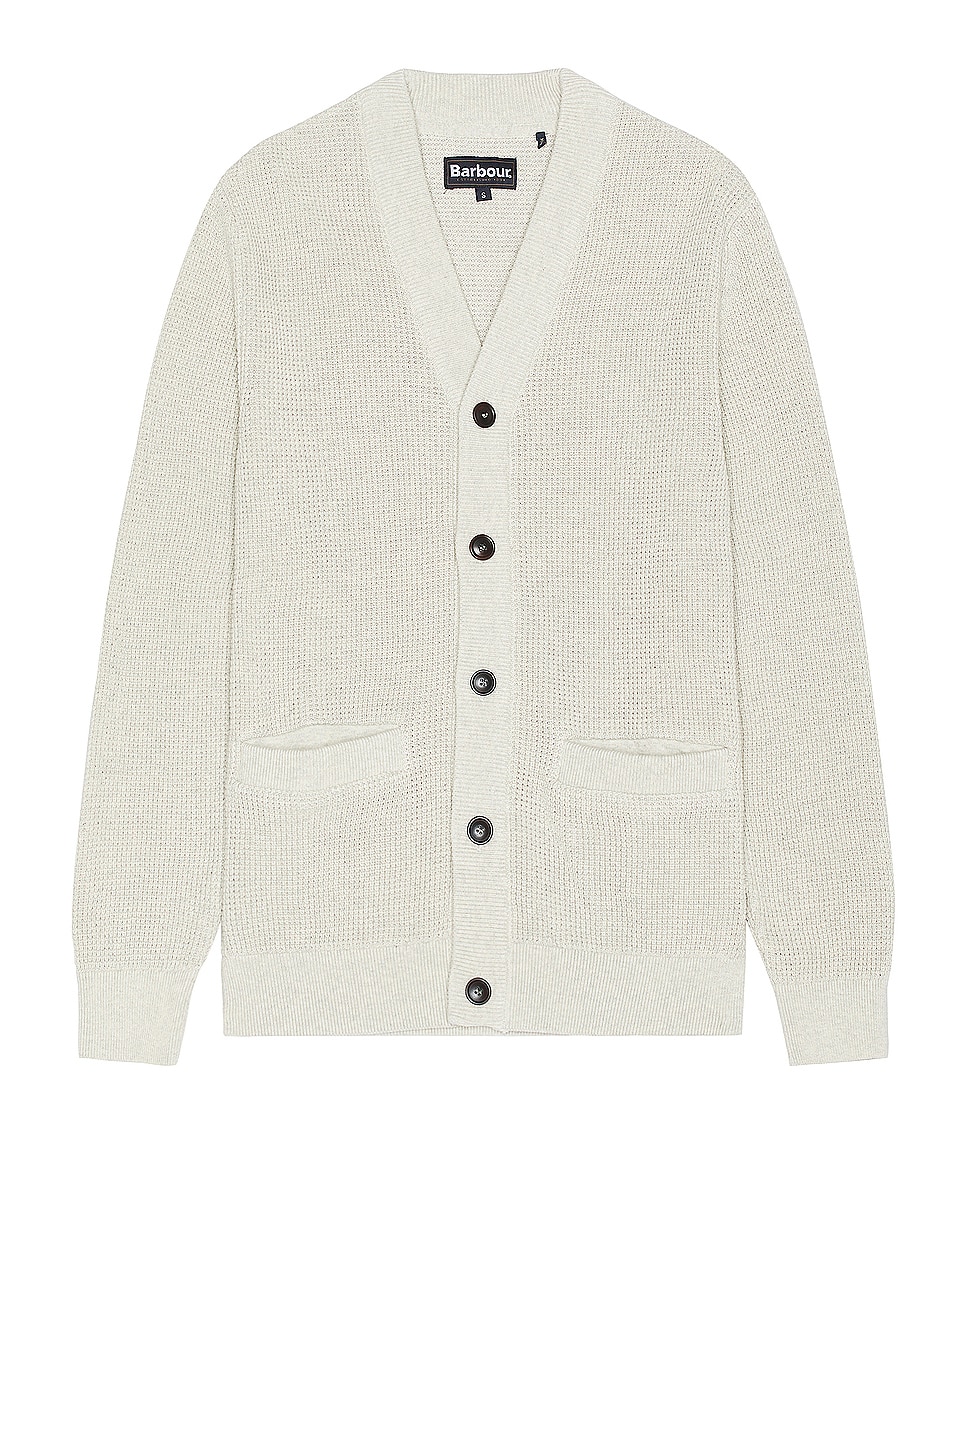 Image 1 of Barbour Howick Cardigan in Whisper White